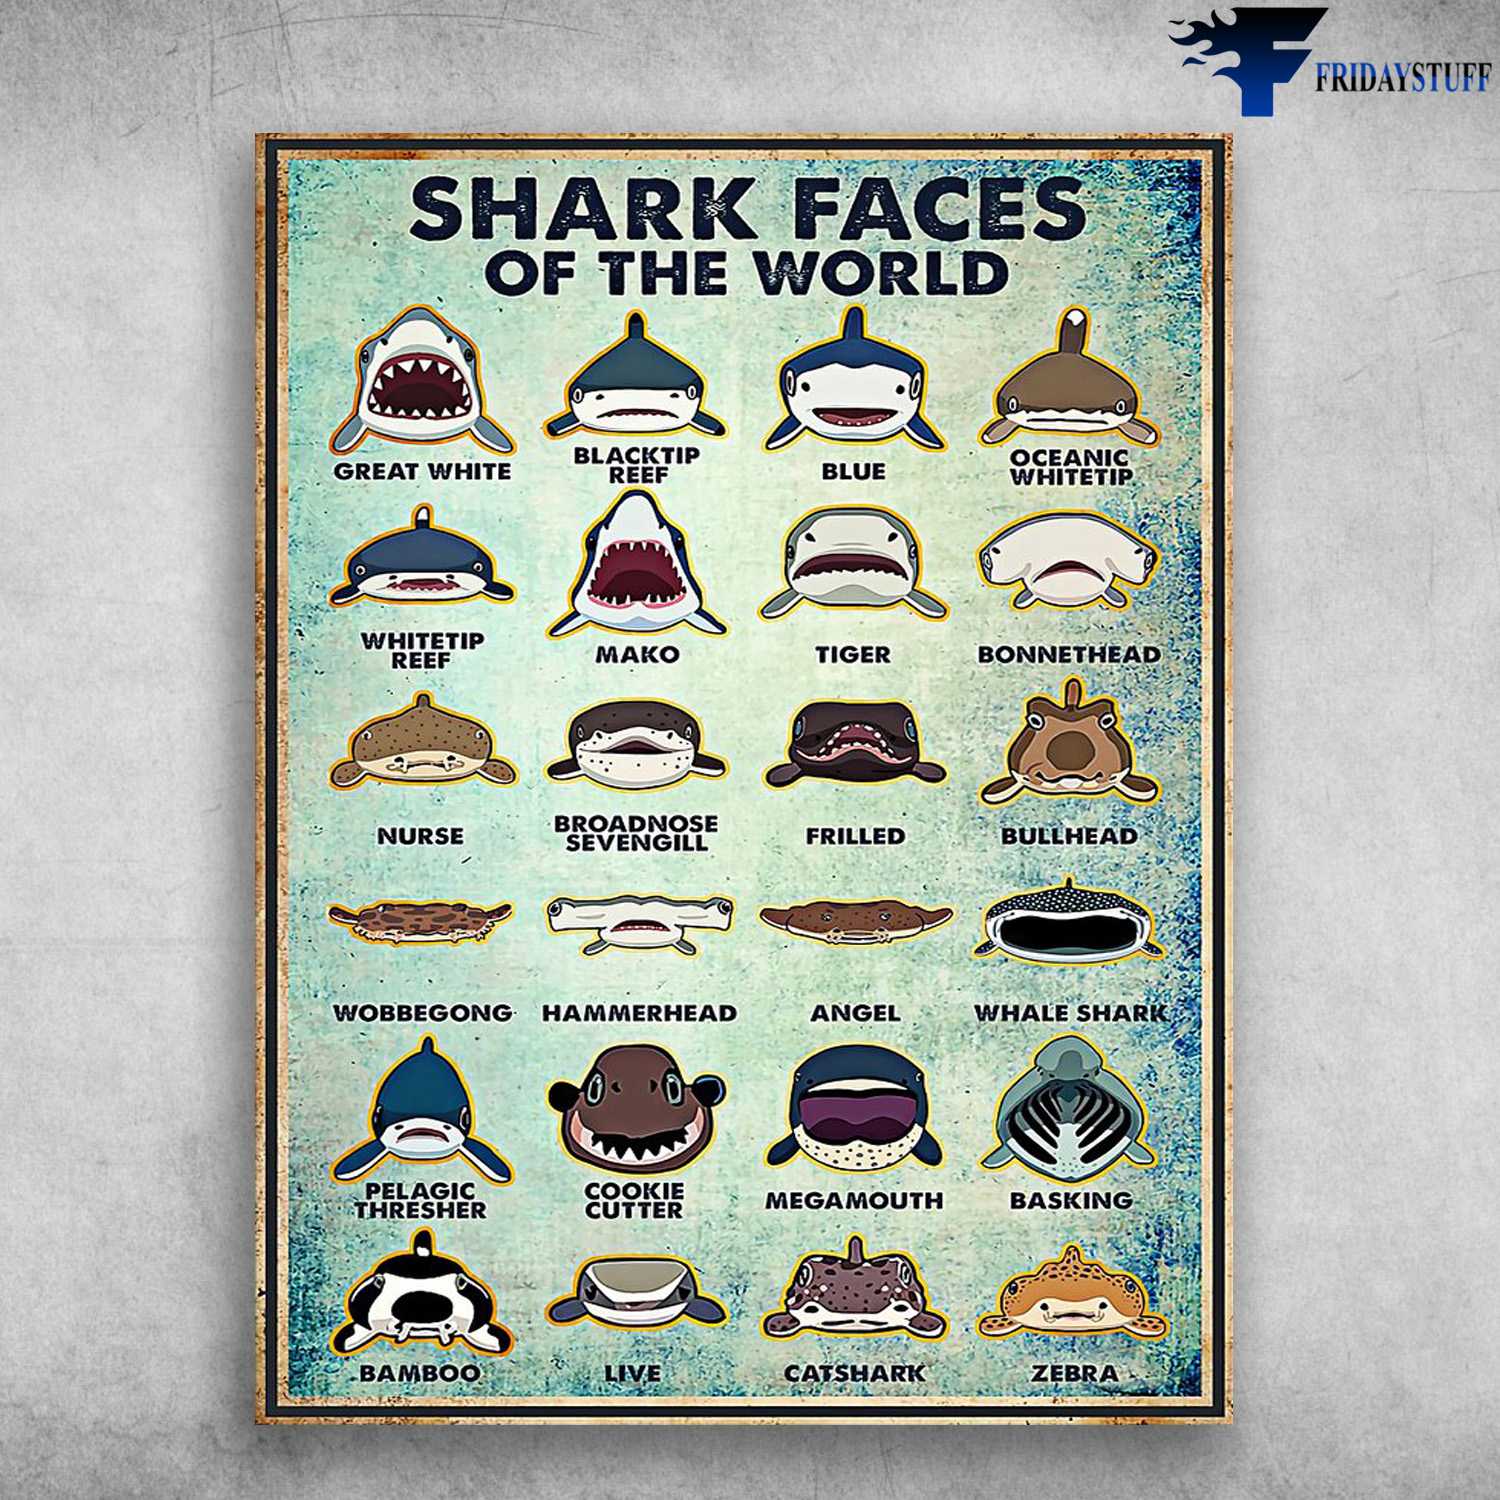 Shark Faces Of The World - Great White, Blacktip Reef, Blue, Oceanic Whiteup, Whitetip Reef, Mako, Tiger, Types Of Shark